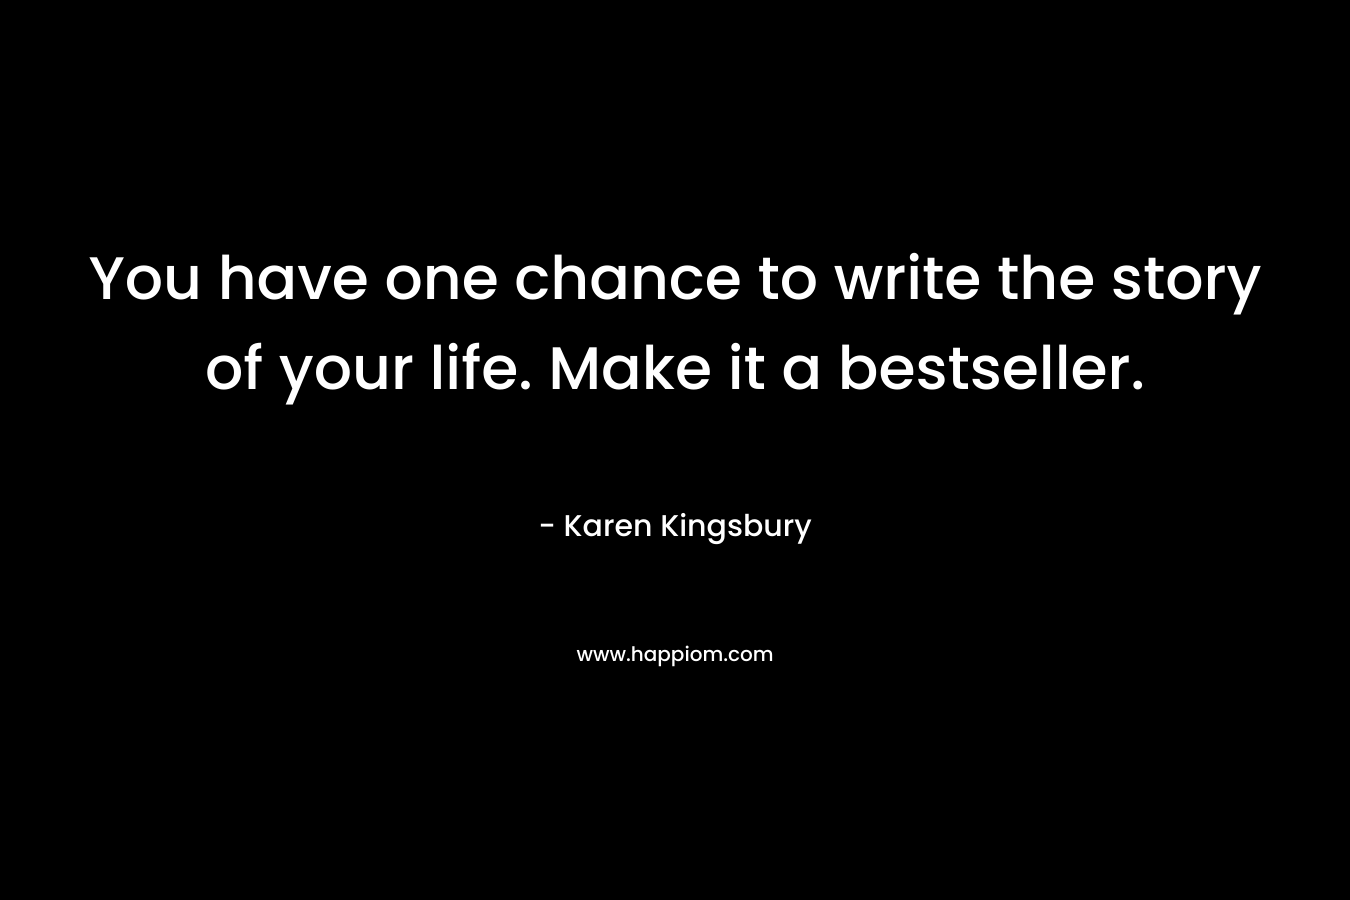 You have one chance to write the story of your life. Make it a bestseller. – Karen Kingsbury